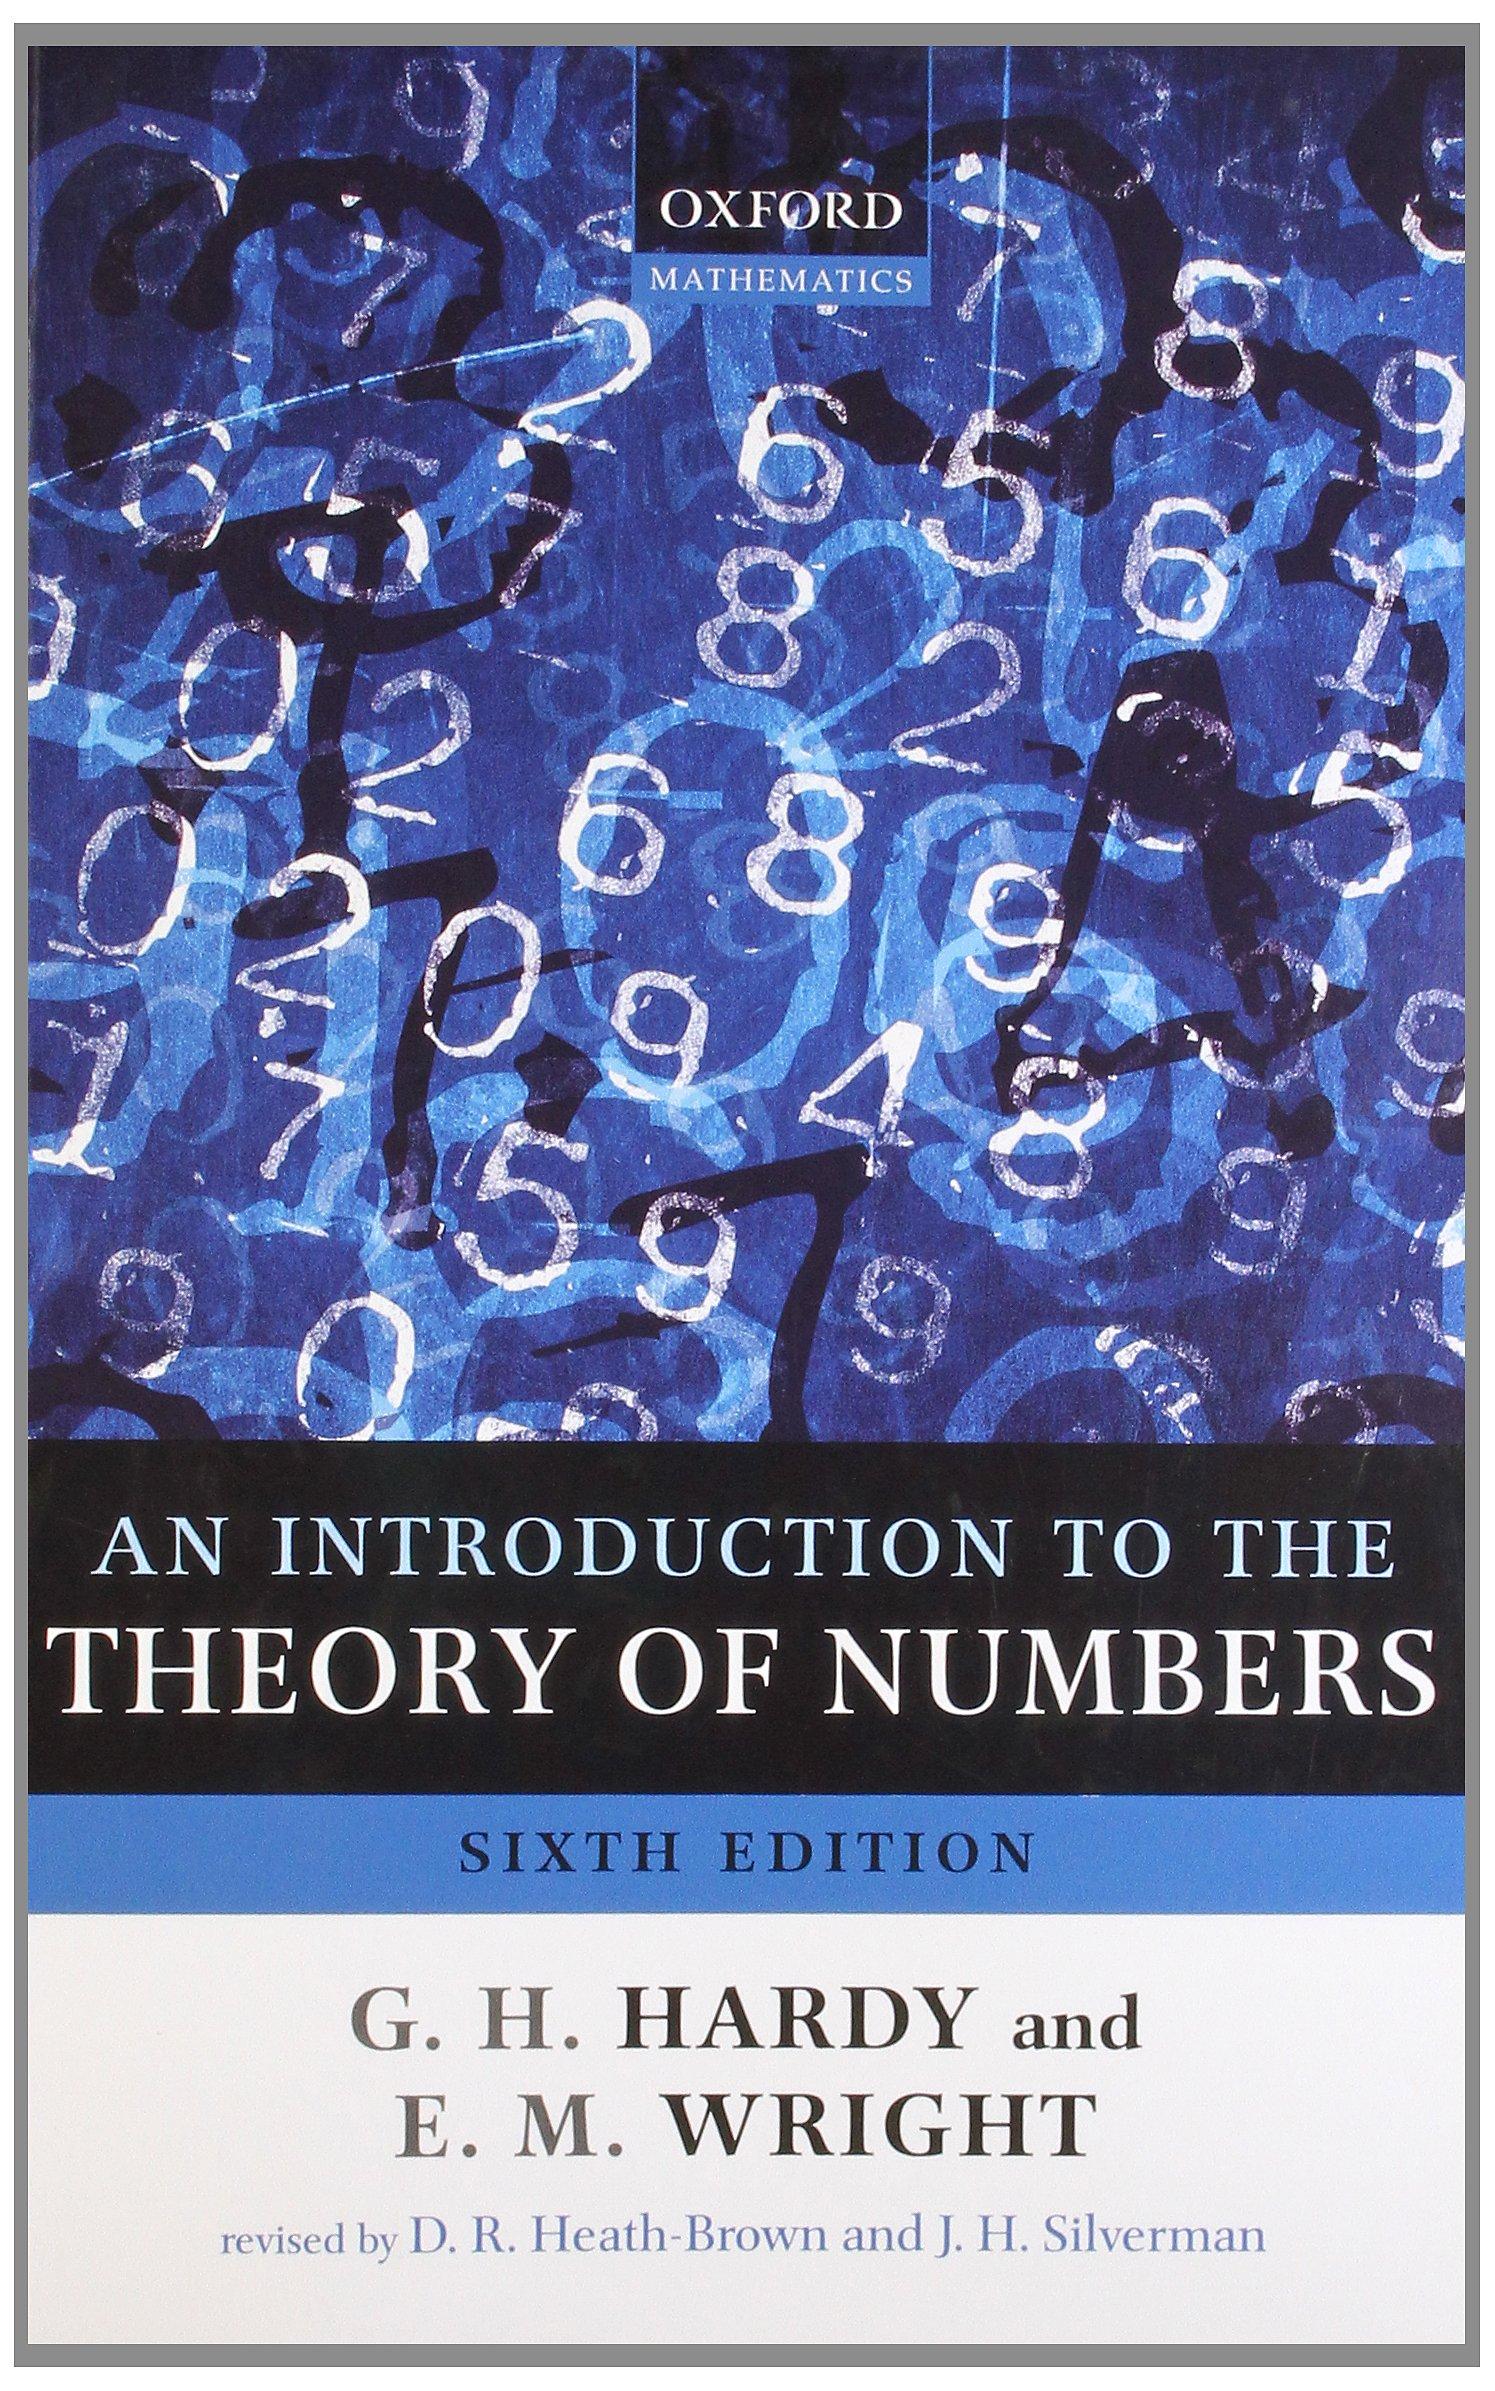 an introduction to the theory of numbers 6th edition g. h. hardy, edward m. wright, andrew wiles, roger